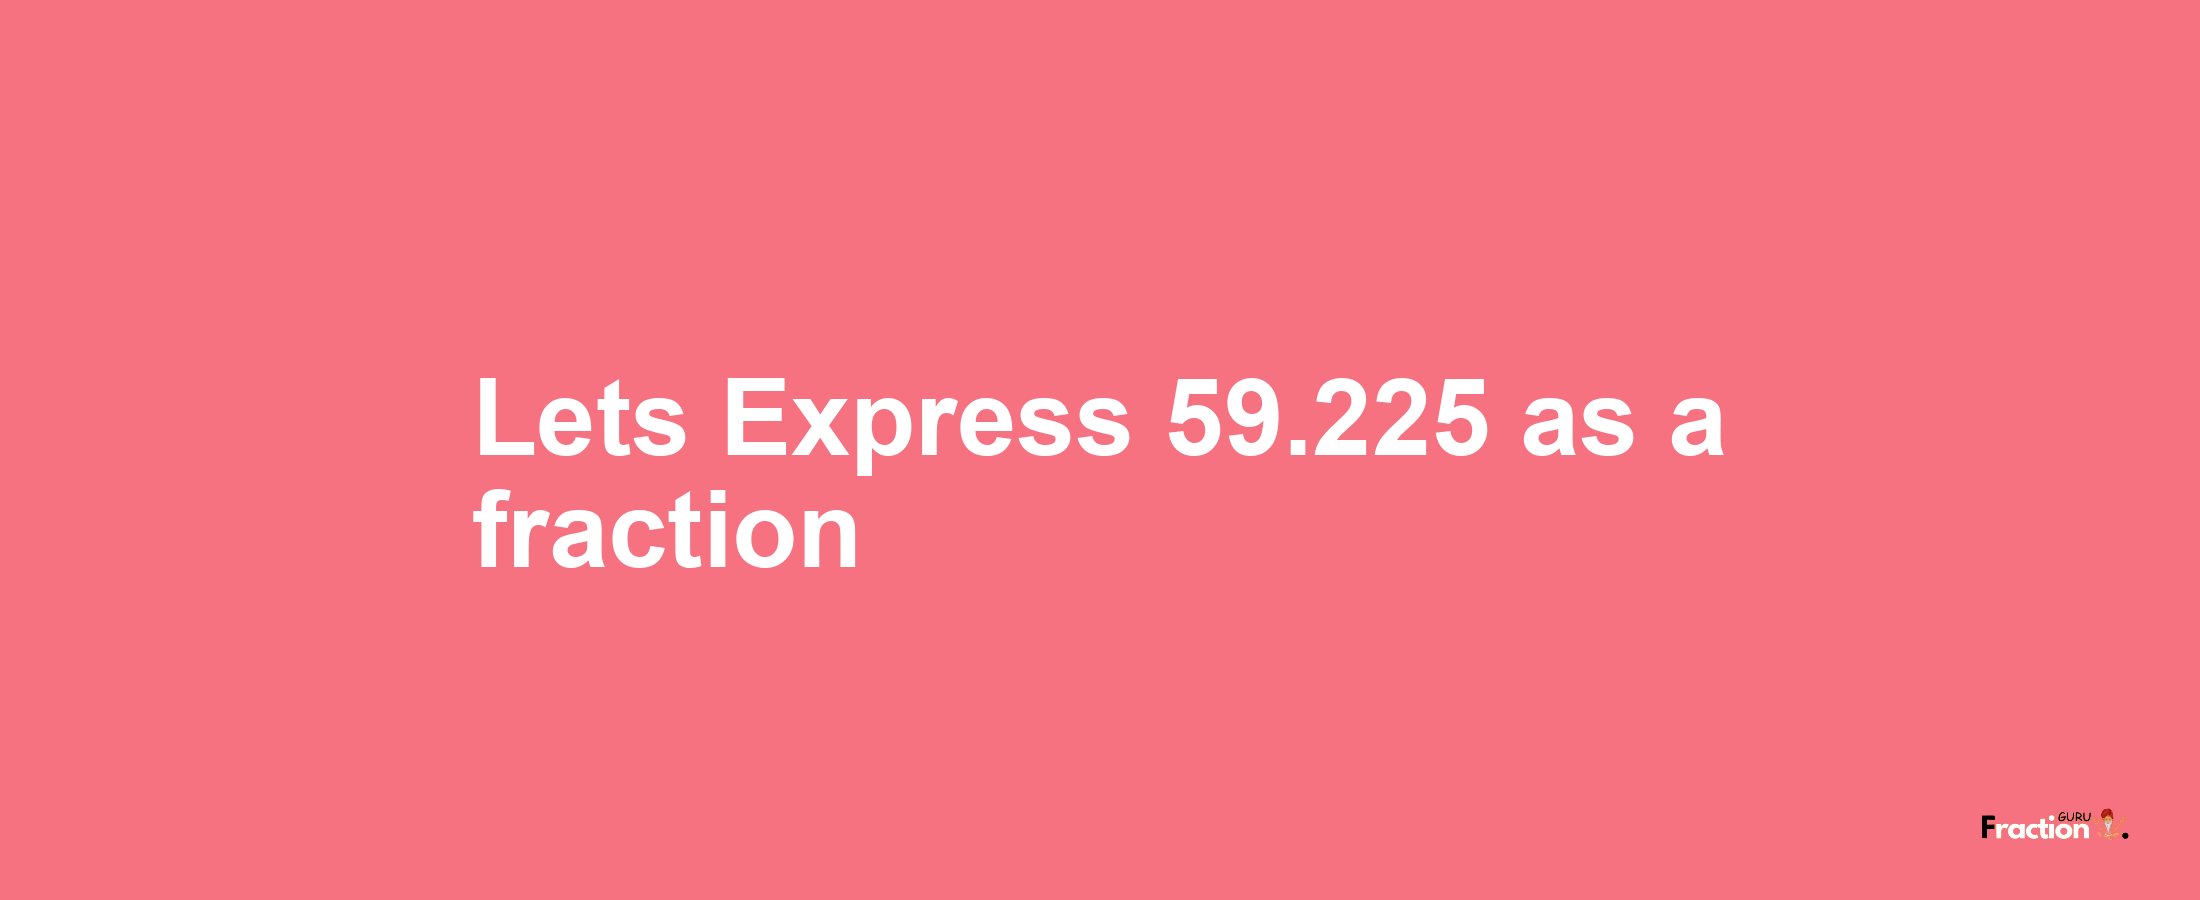 Lets Express 59.225 as afraction